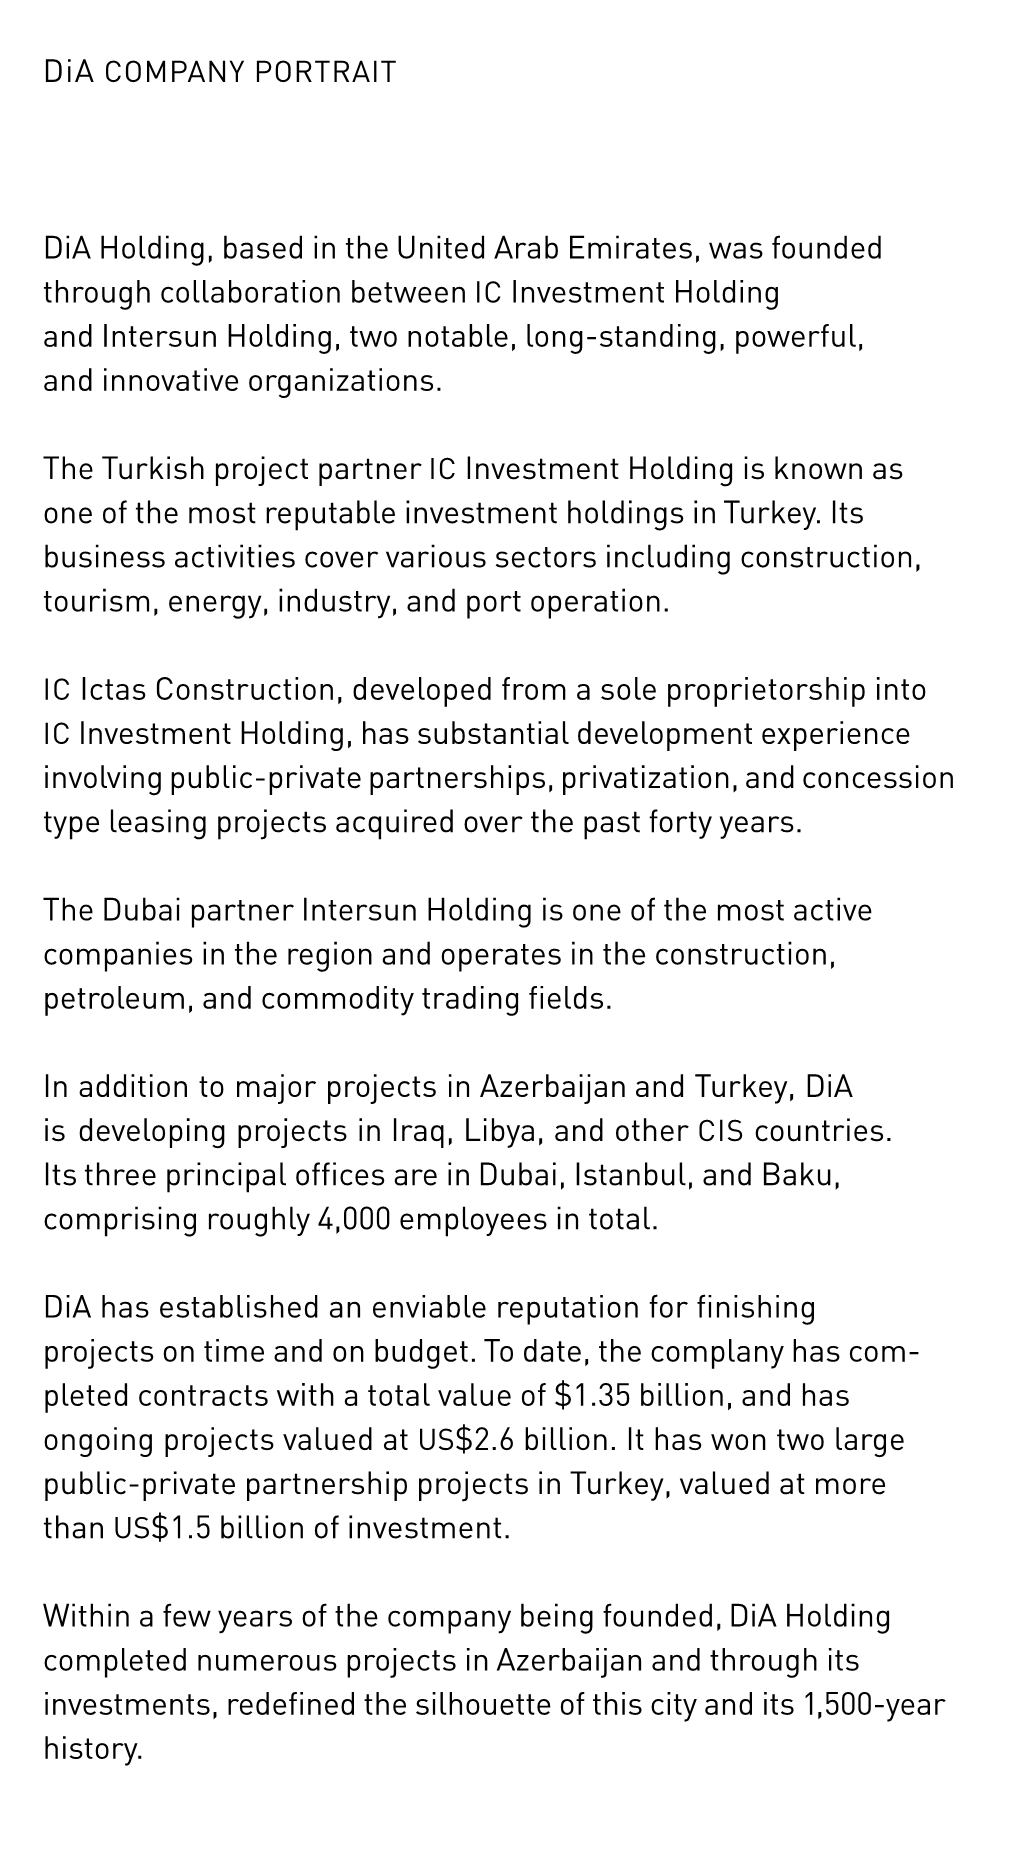 Dia Holding, Based in the United Arab Emirates, Was Founded Through